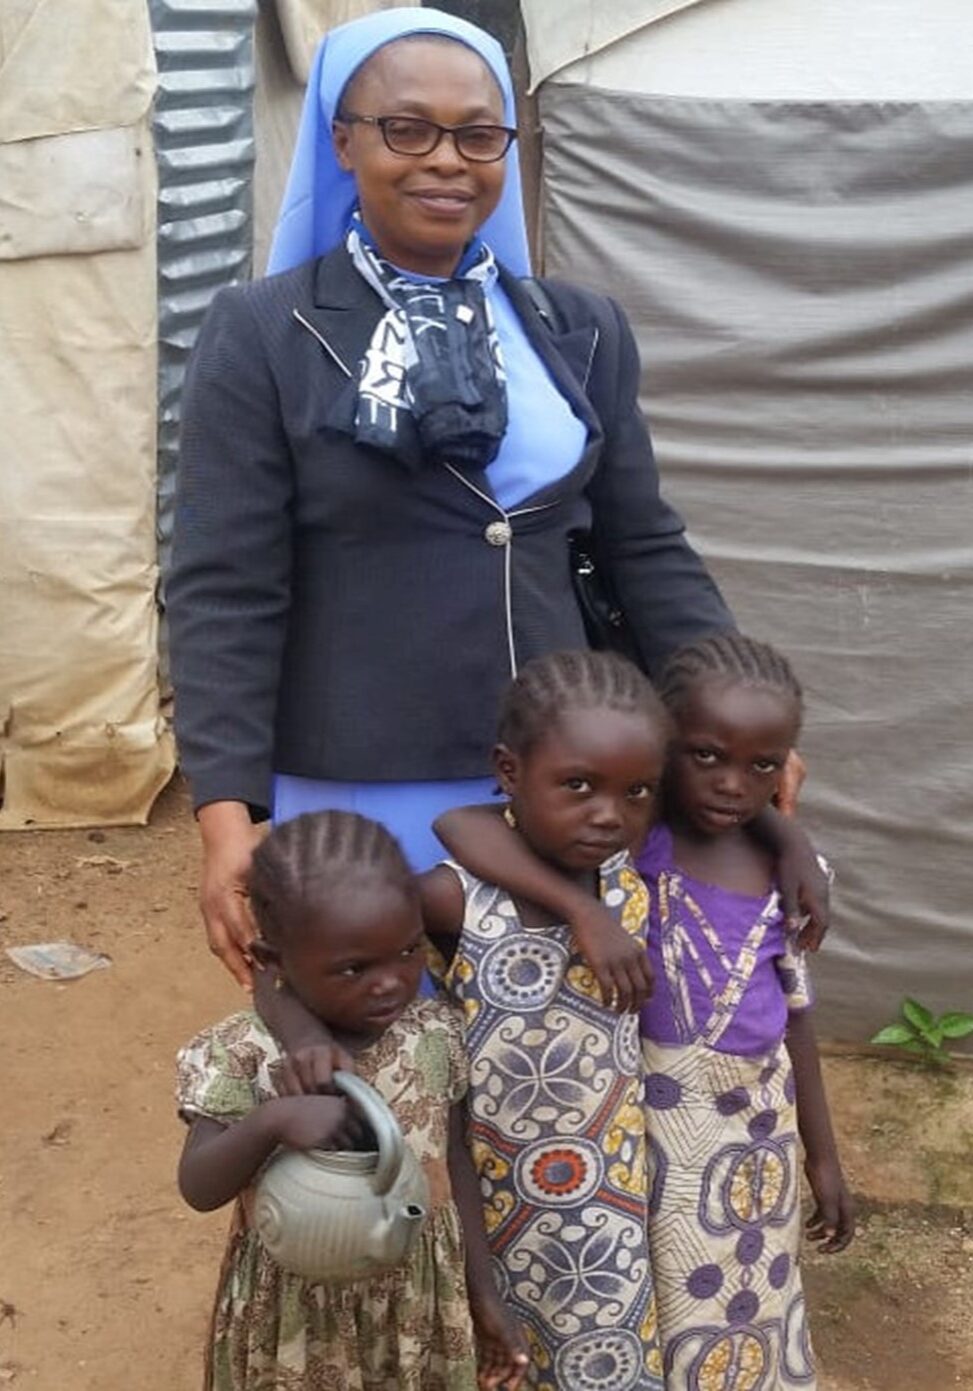 Rev. Sr. Carol Ijeoma Njoku providing humanitarian assistance to displaced children in Northern Nigeria, 2018 working with Win-Dream International and the Sanctuary Missionaries. 